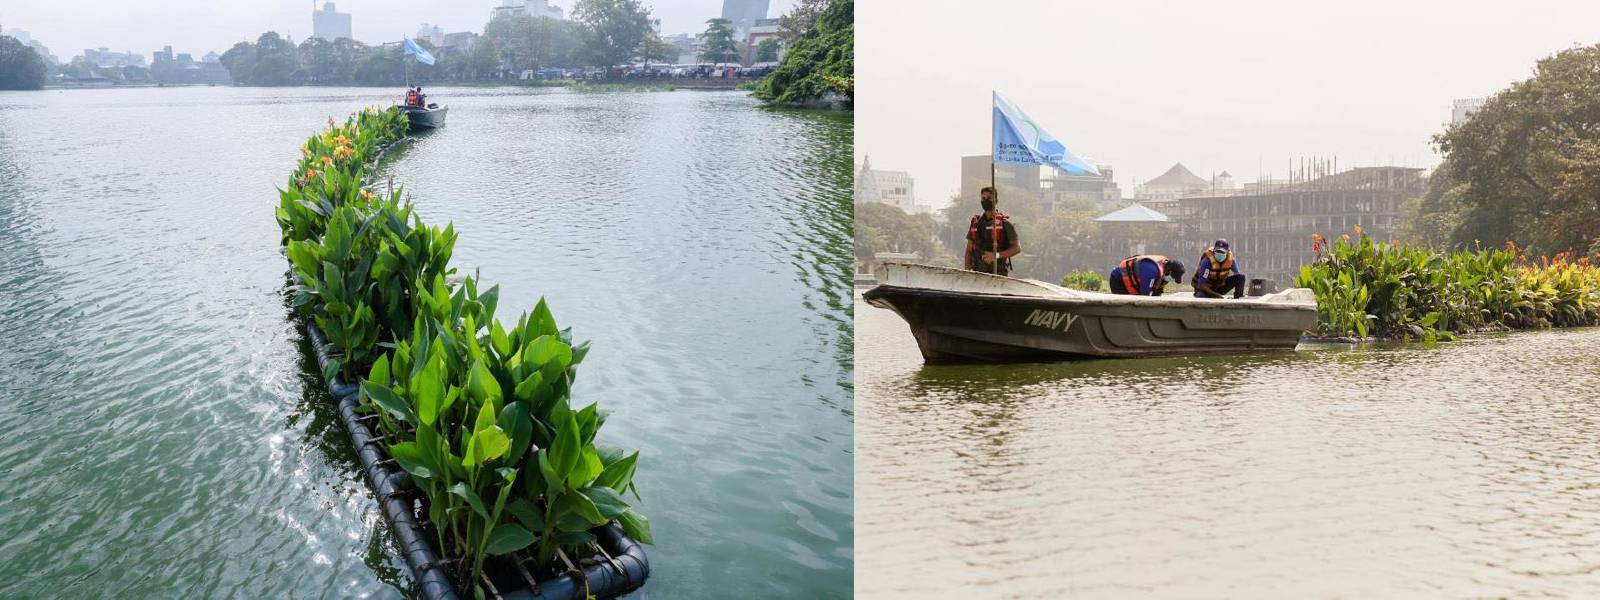 “Ecological floating islands” released to clean-up Beira Lake